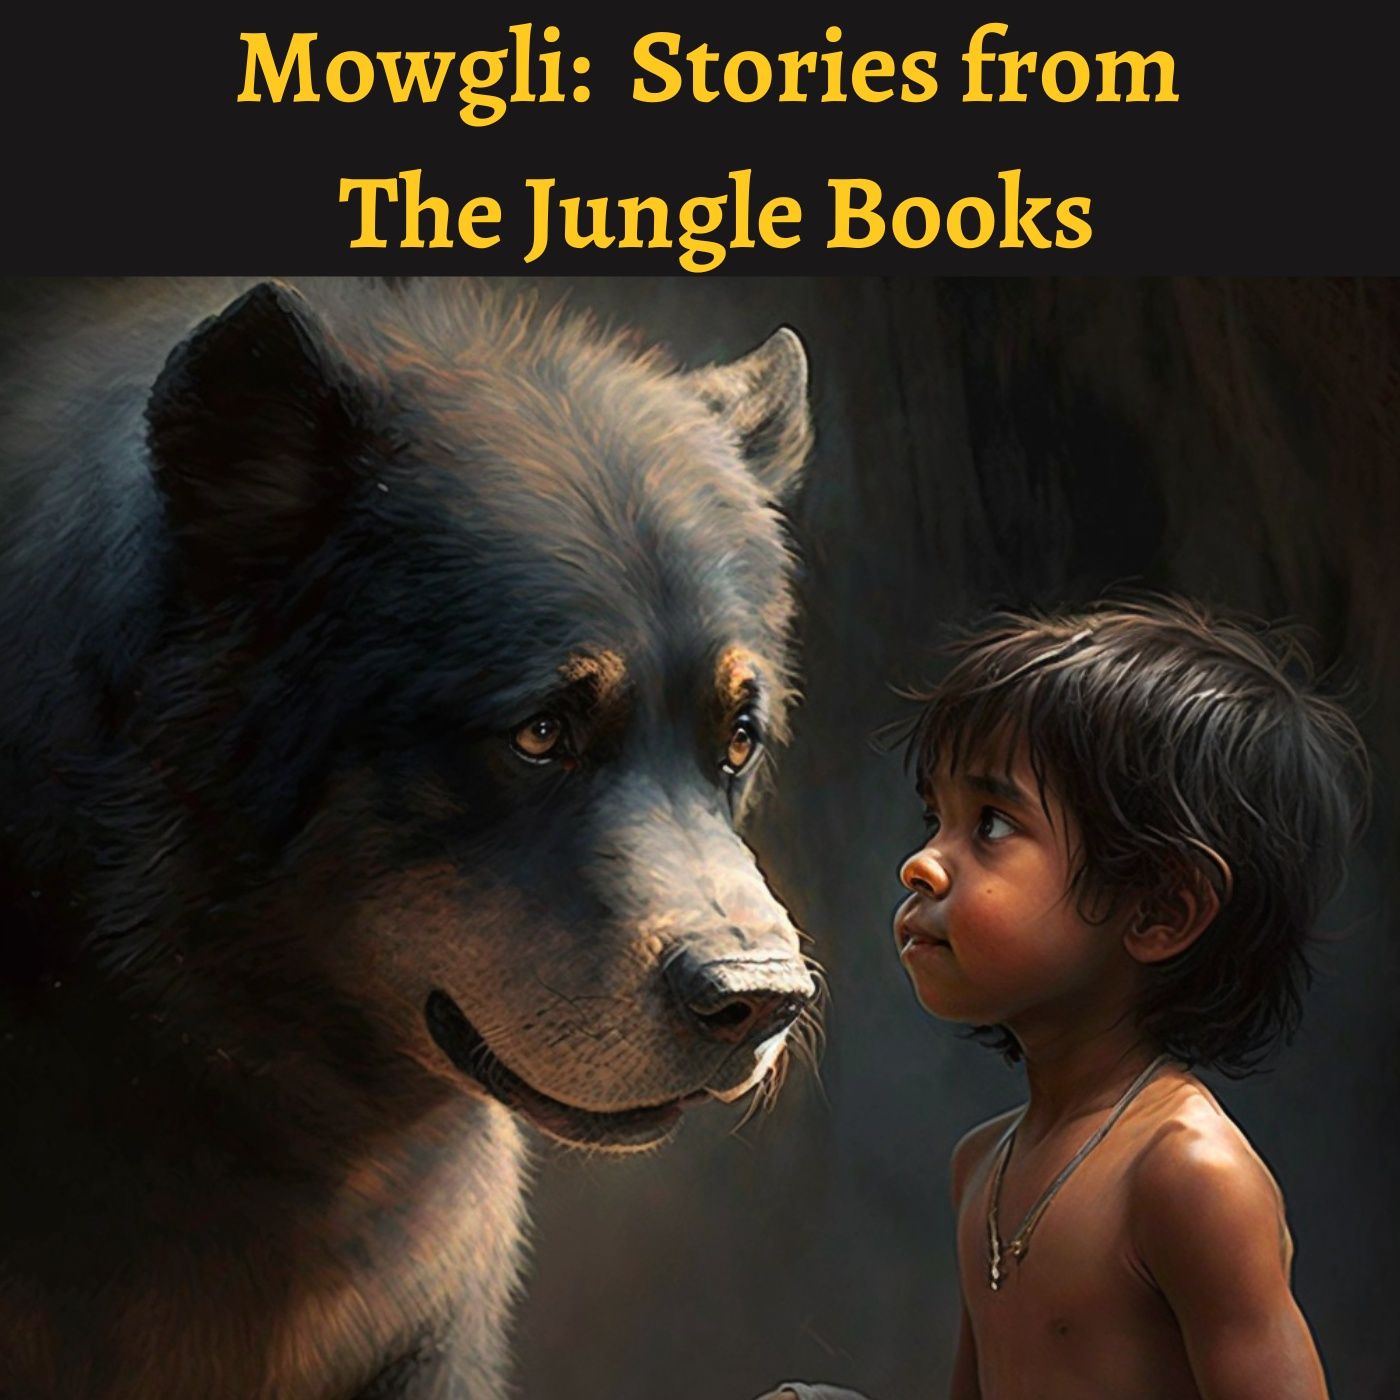 Mowgli – Stories from the Jungle Books